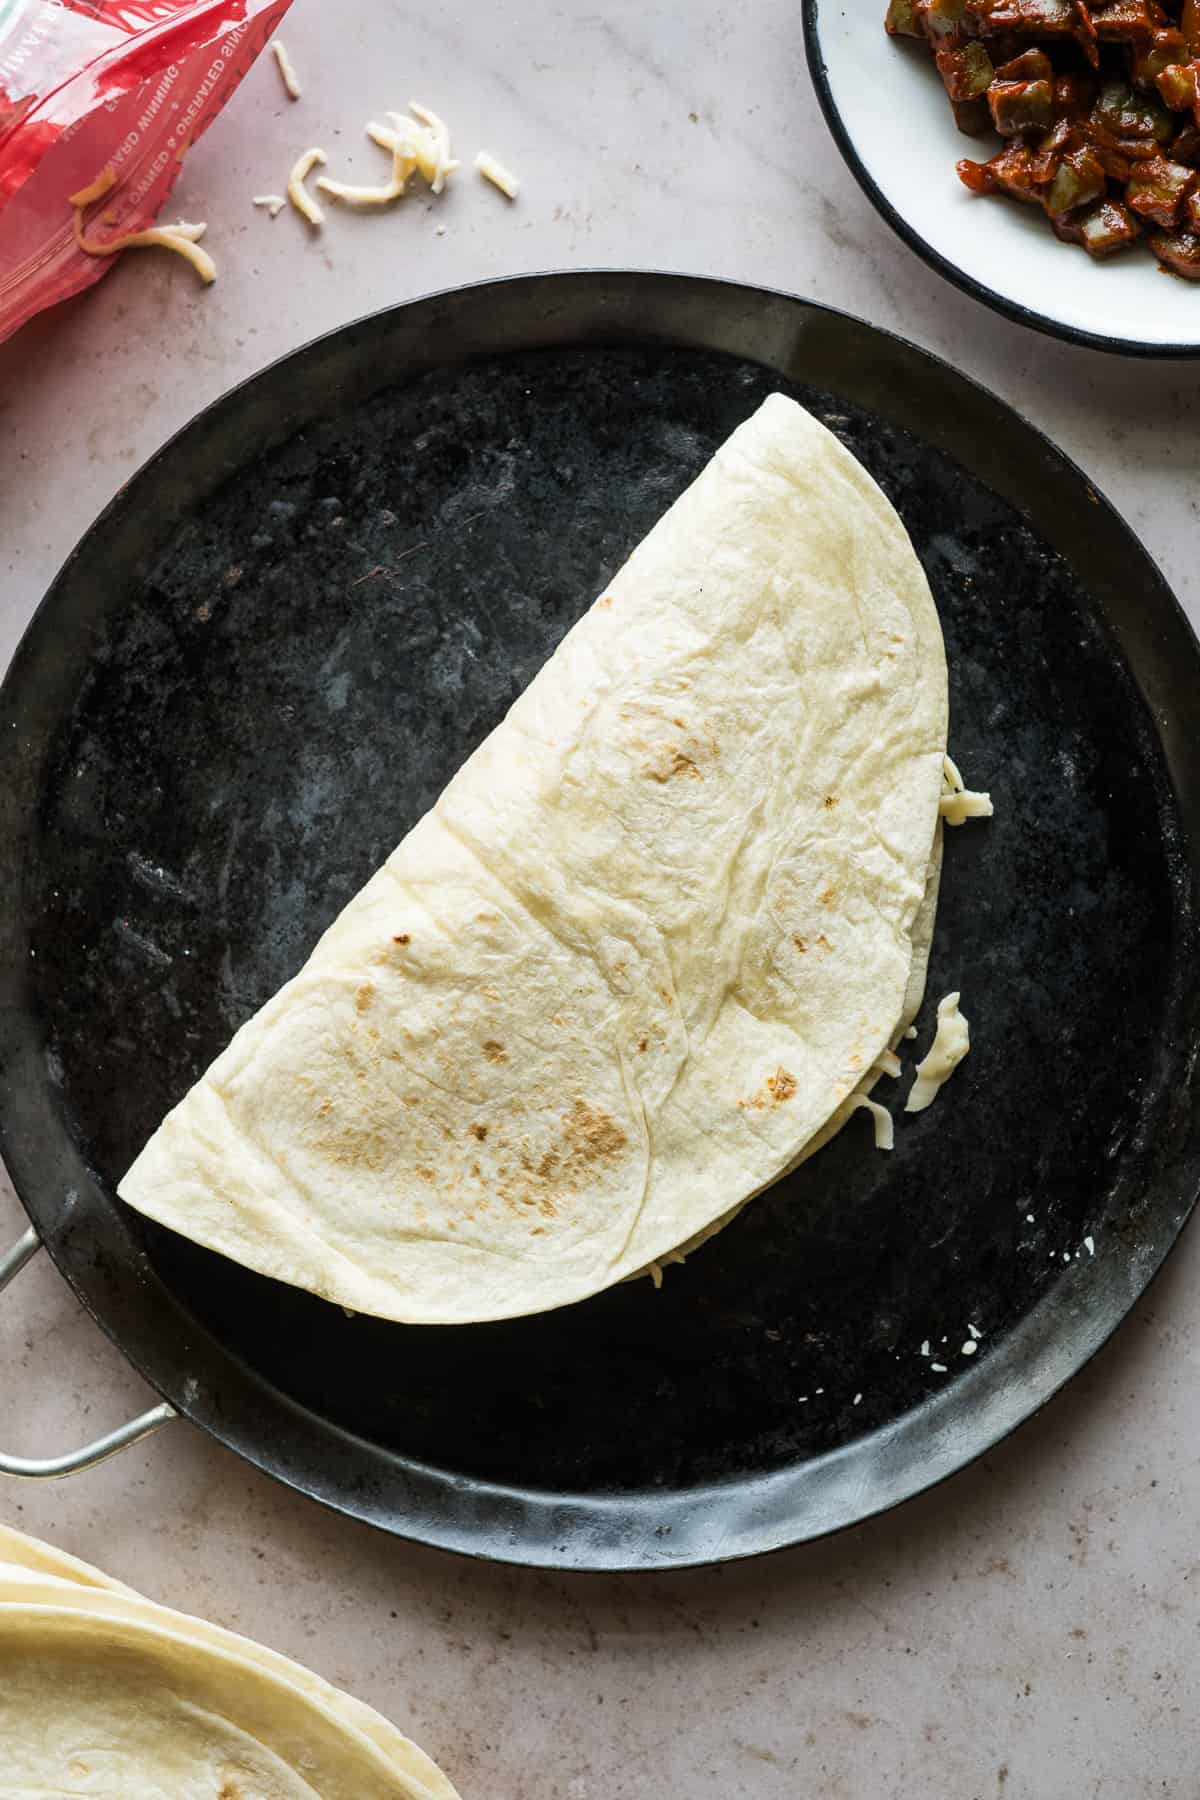 An uncooked quesadilla on a comal.